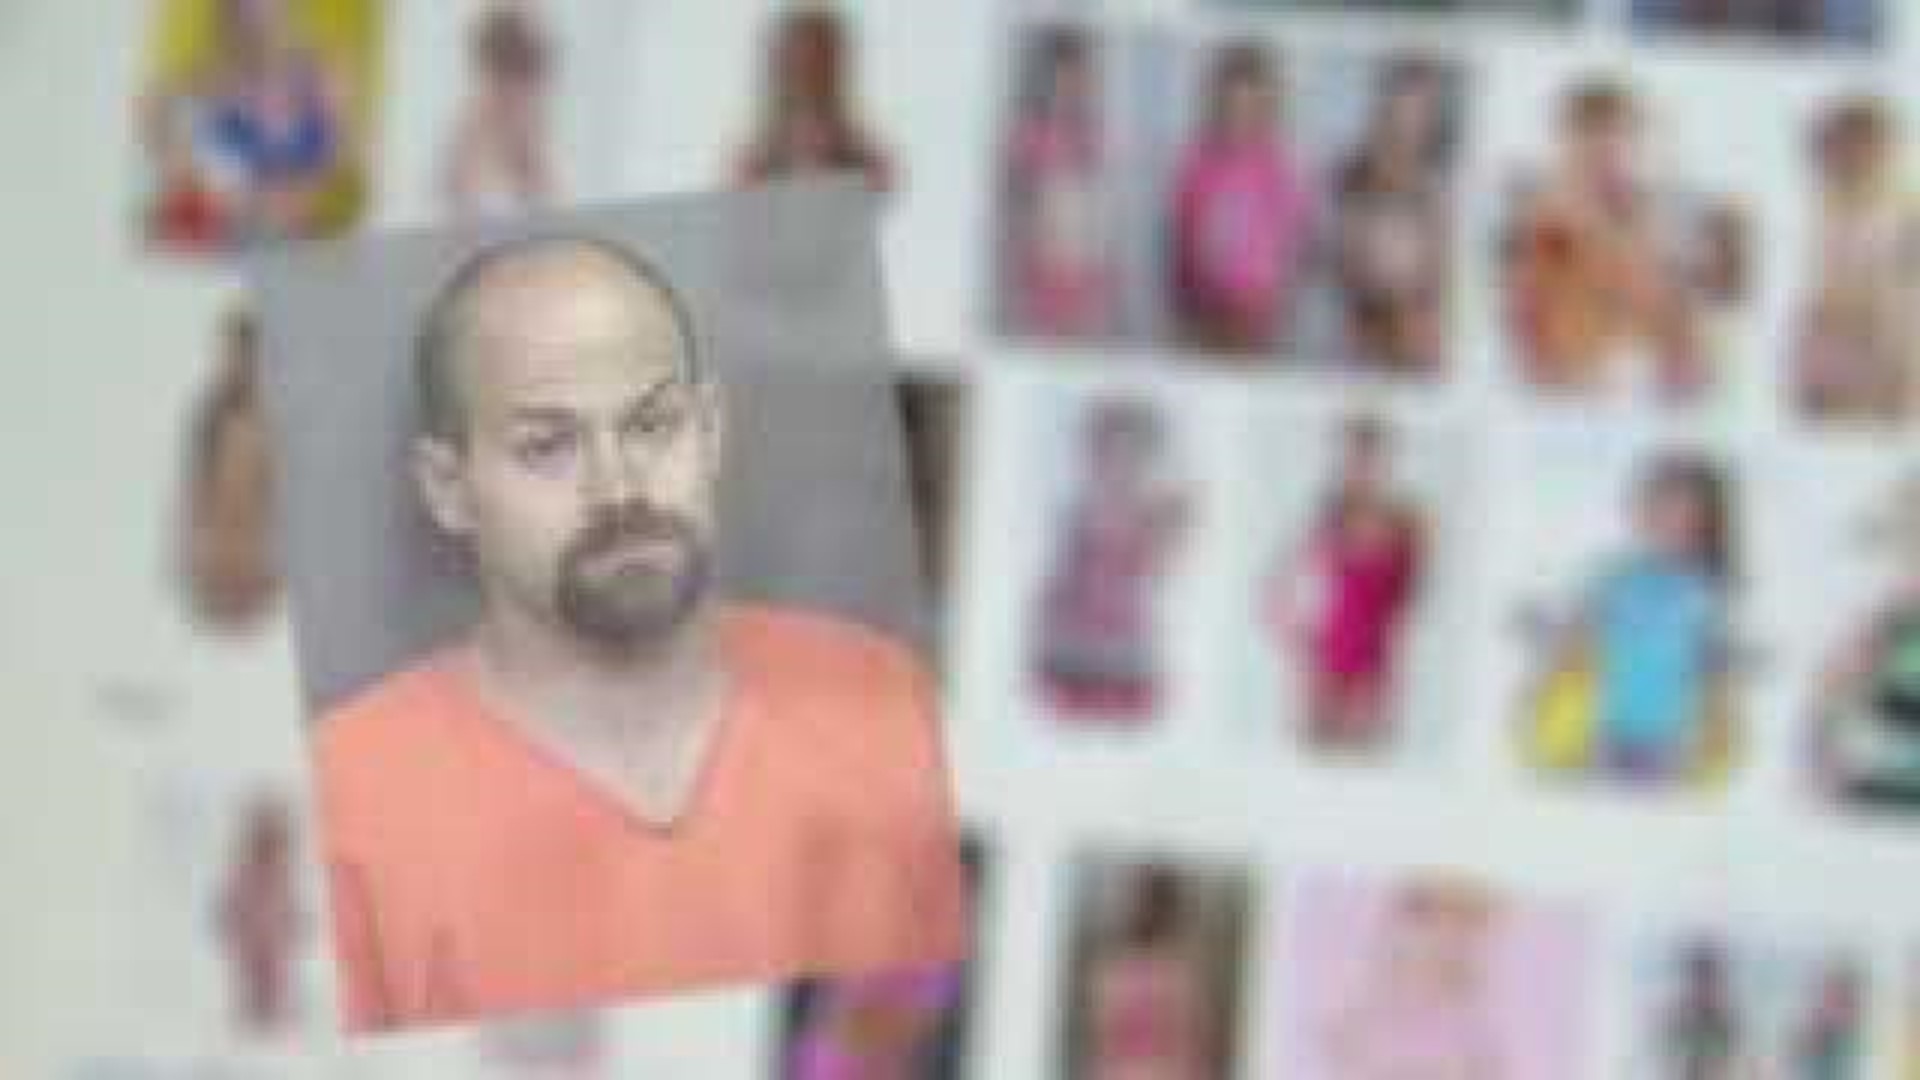 Kiddi Porn Russian Toddler - Silvis man accused to posting child porn on Russian website | wqad.com